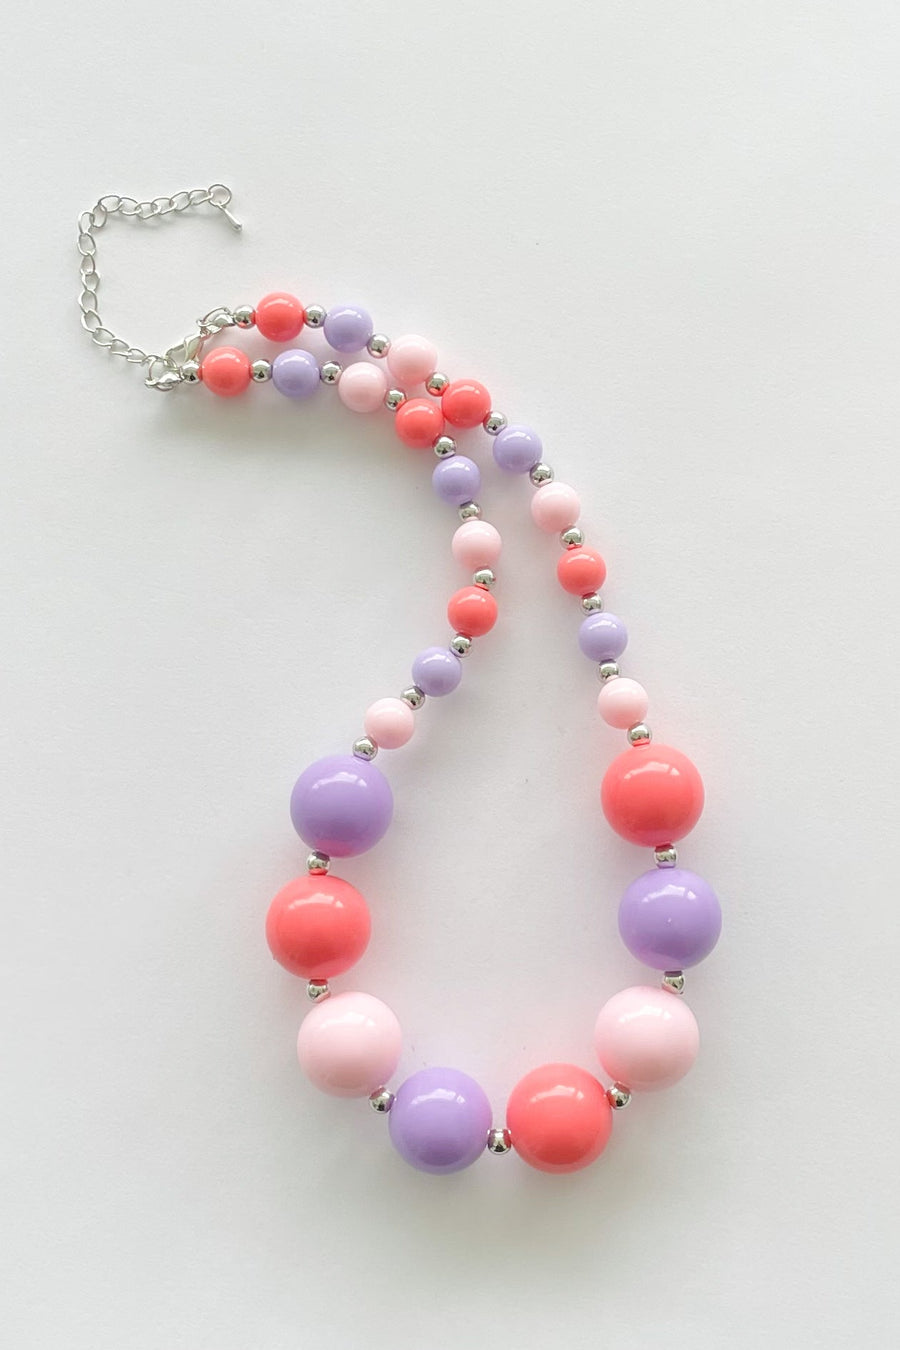 Coral/Pink/Lilac Chunky Necklace - Rylee Faith Designs